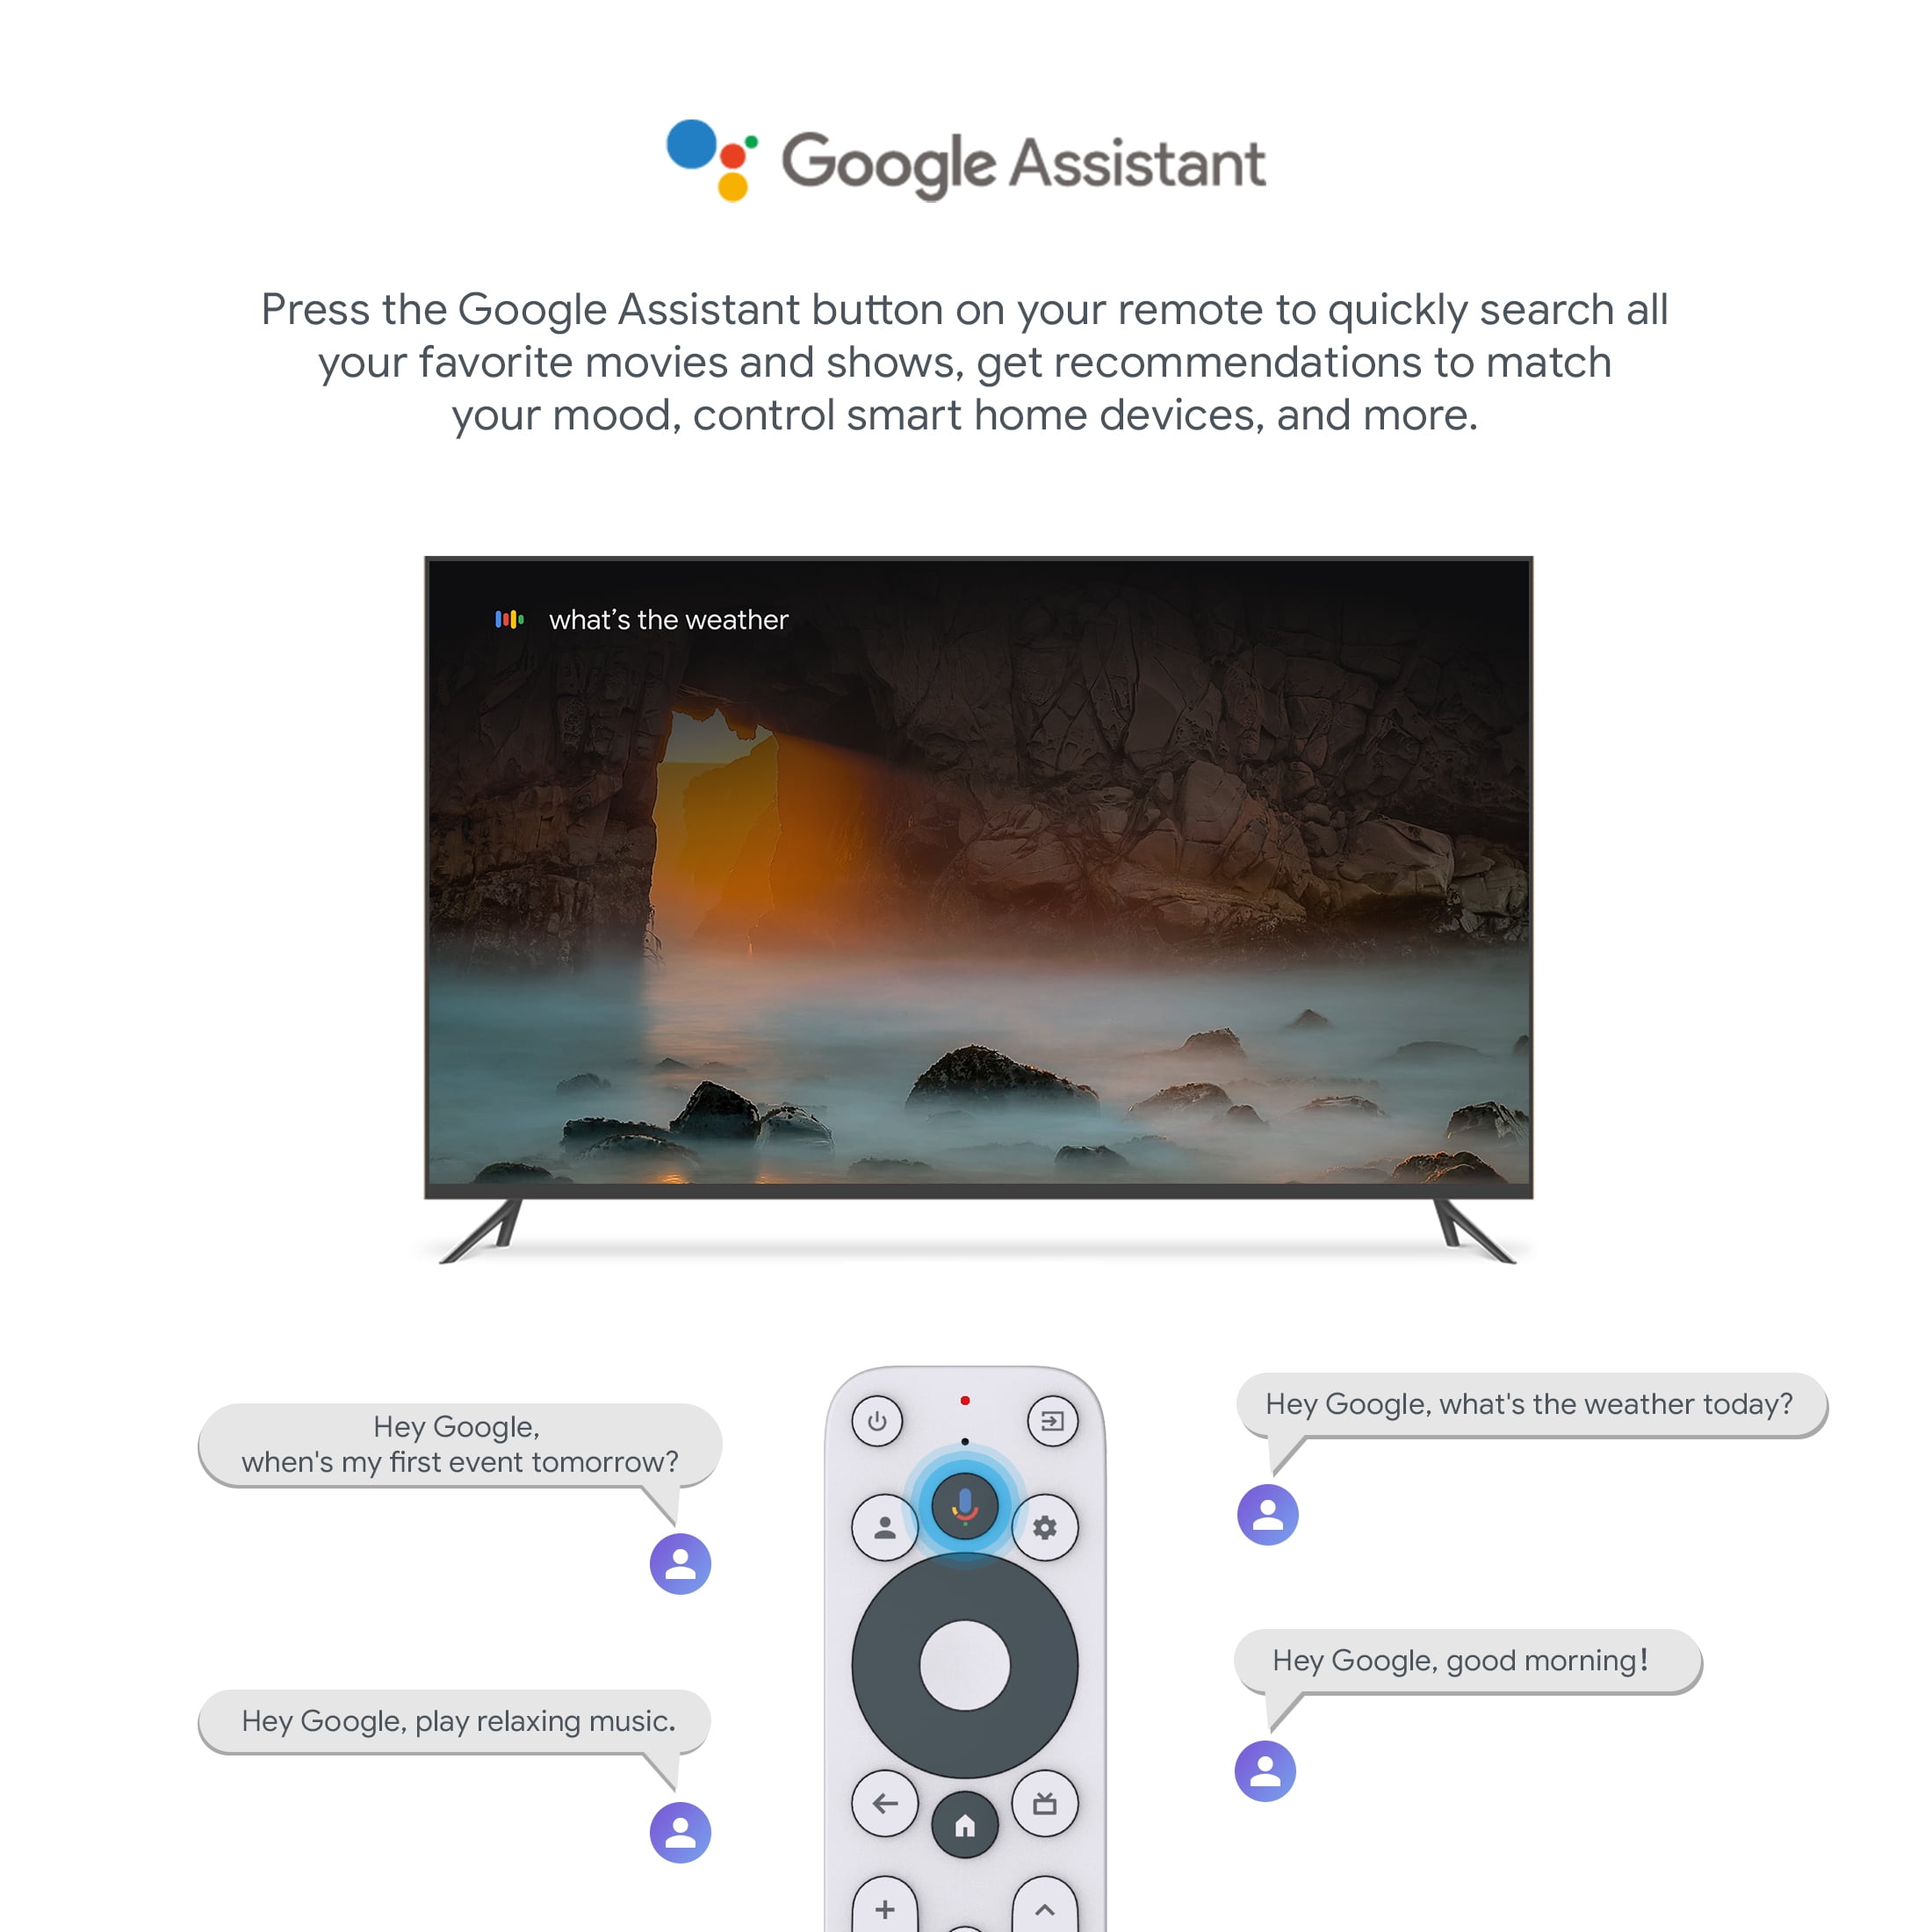 New Walmart Onn 4K Android/Google TV Streamer makes its first appearance